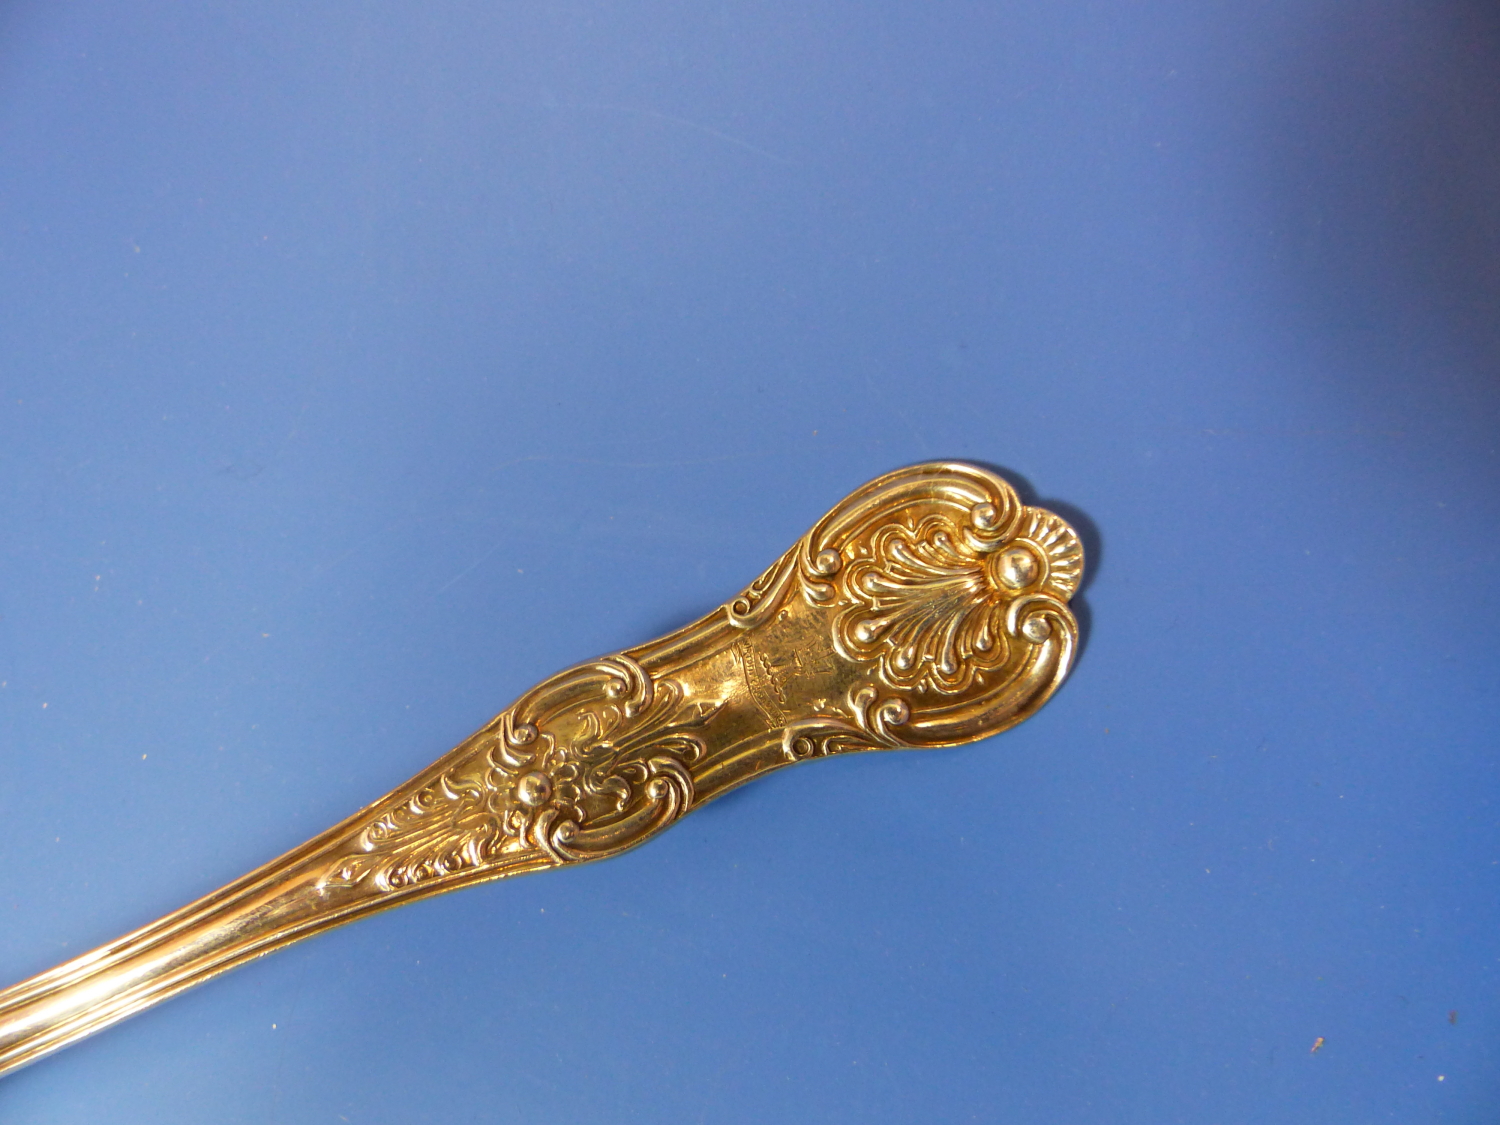 A PAIR OF 19th C. QUEENS PATTERN HALLMARKED SILVER SAUCE LADLES DATED 1851 GLASGOW FOR JOHN - Image 7 of 28